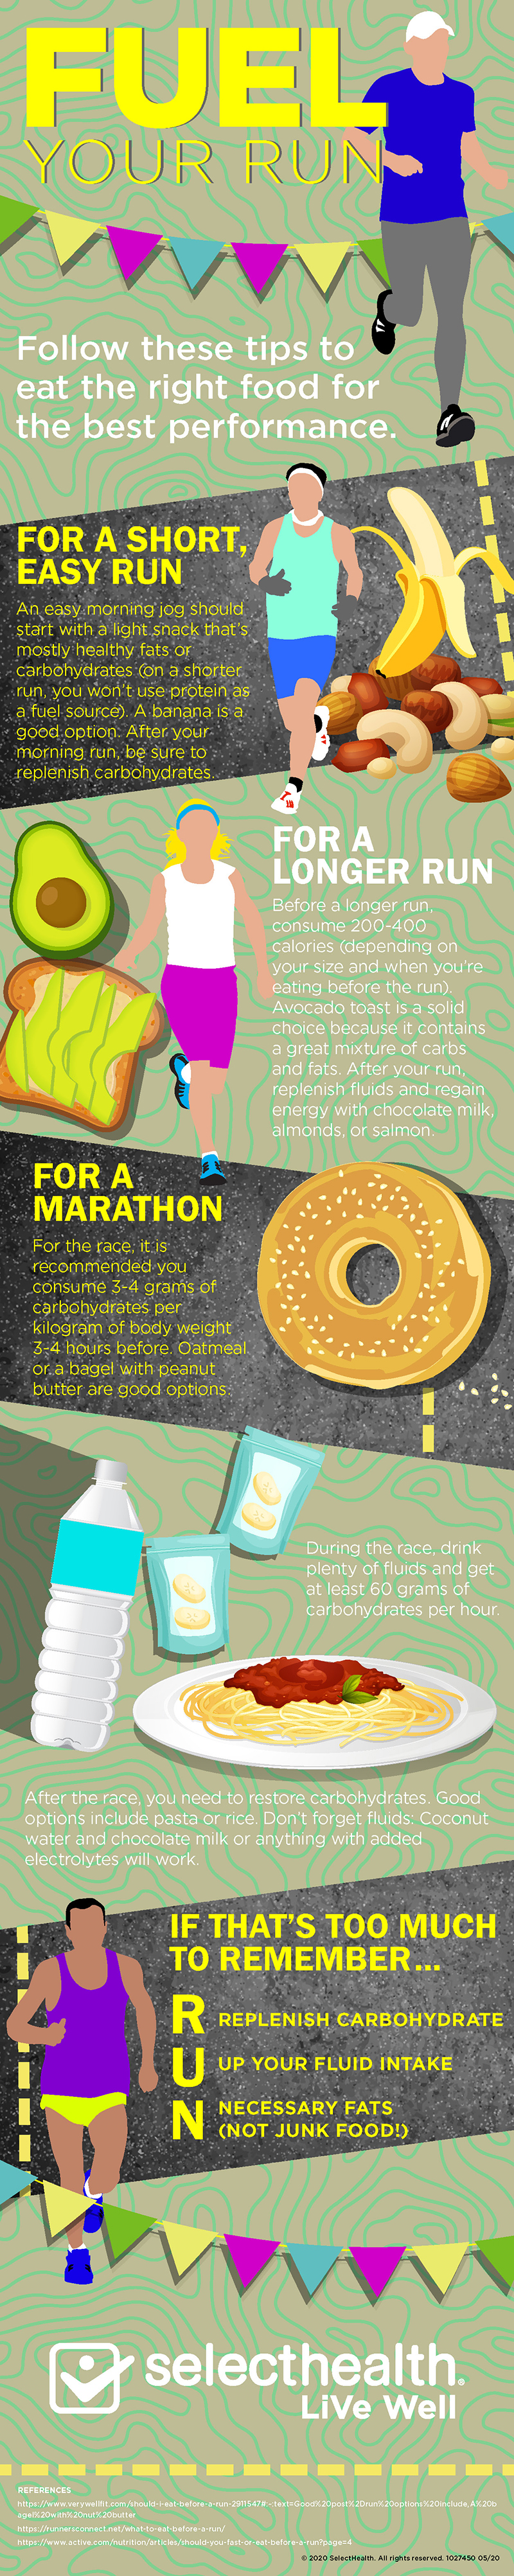 Infograhic illustrating how to properly eat or fuel for a race